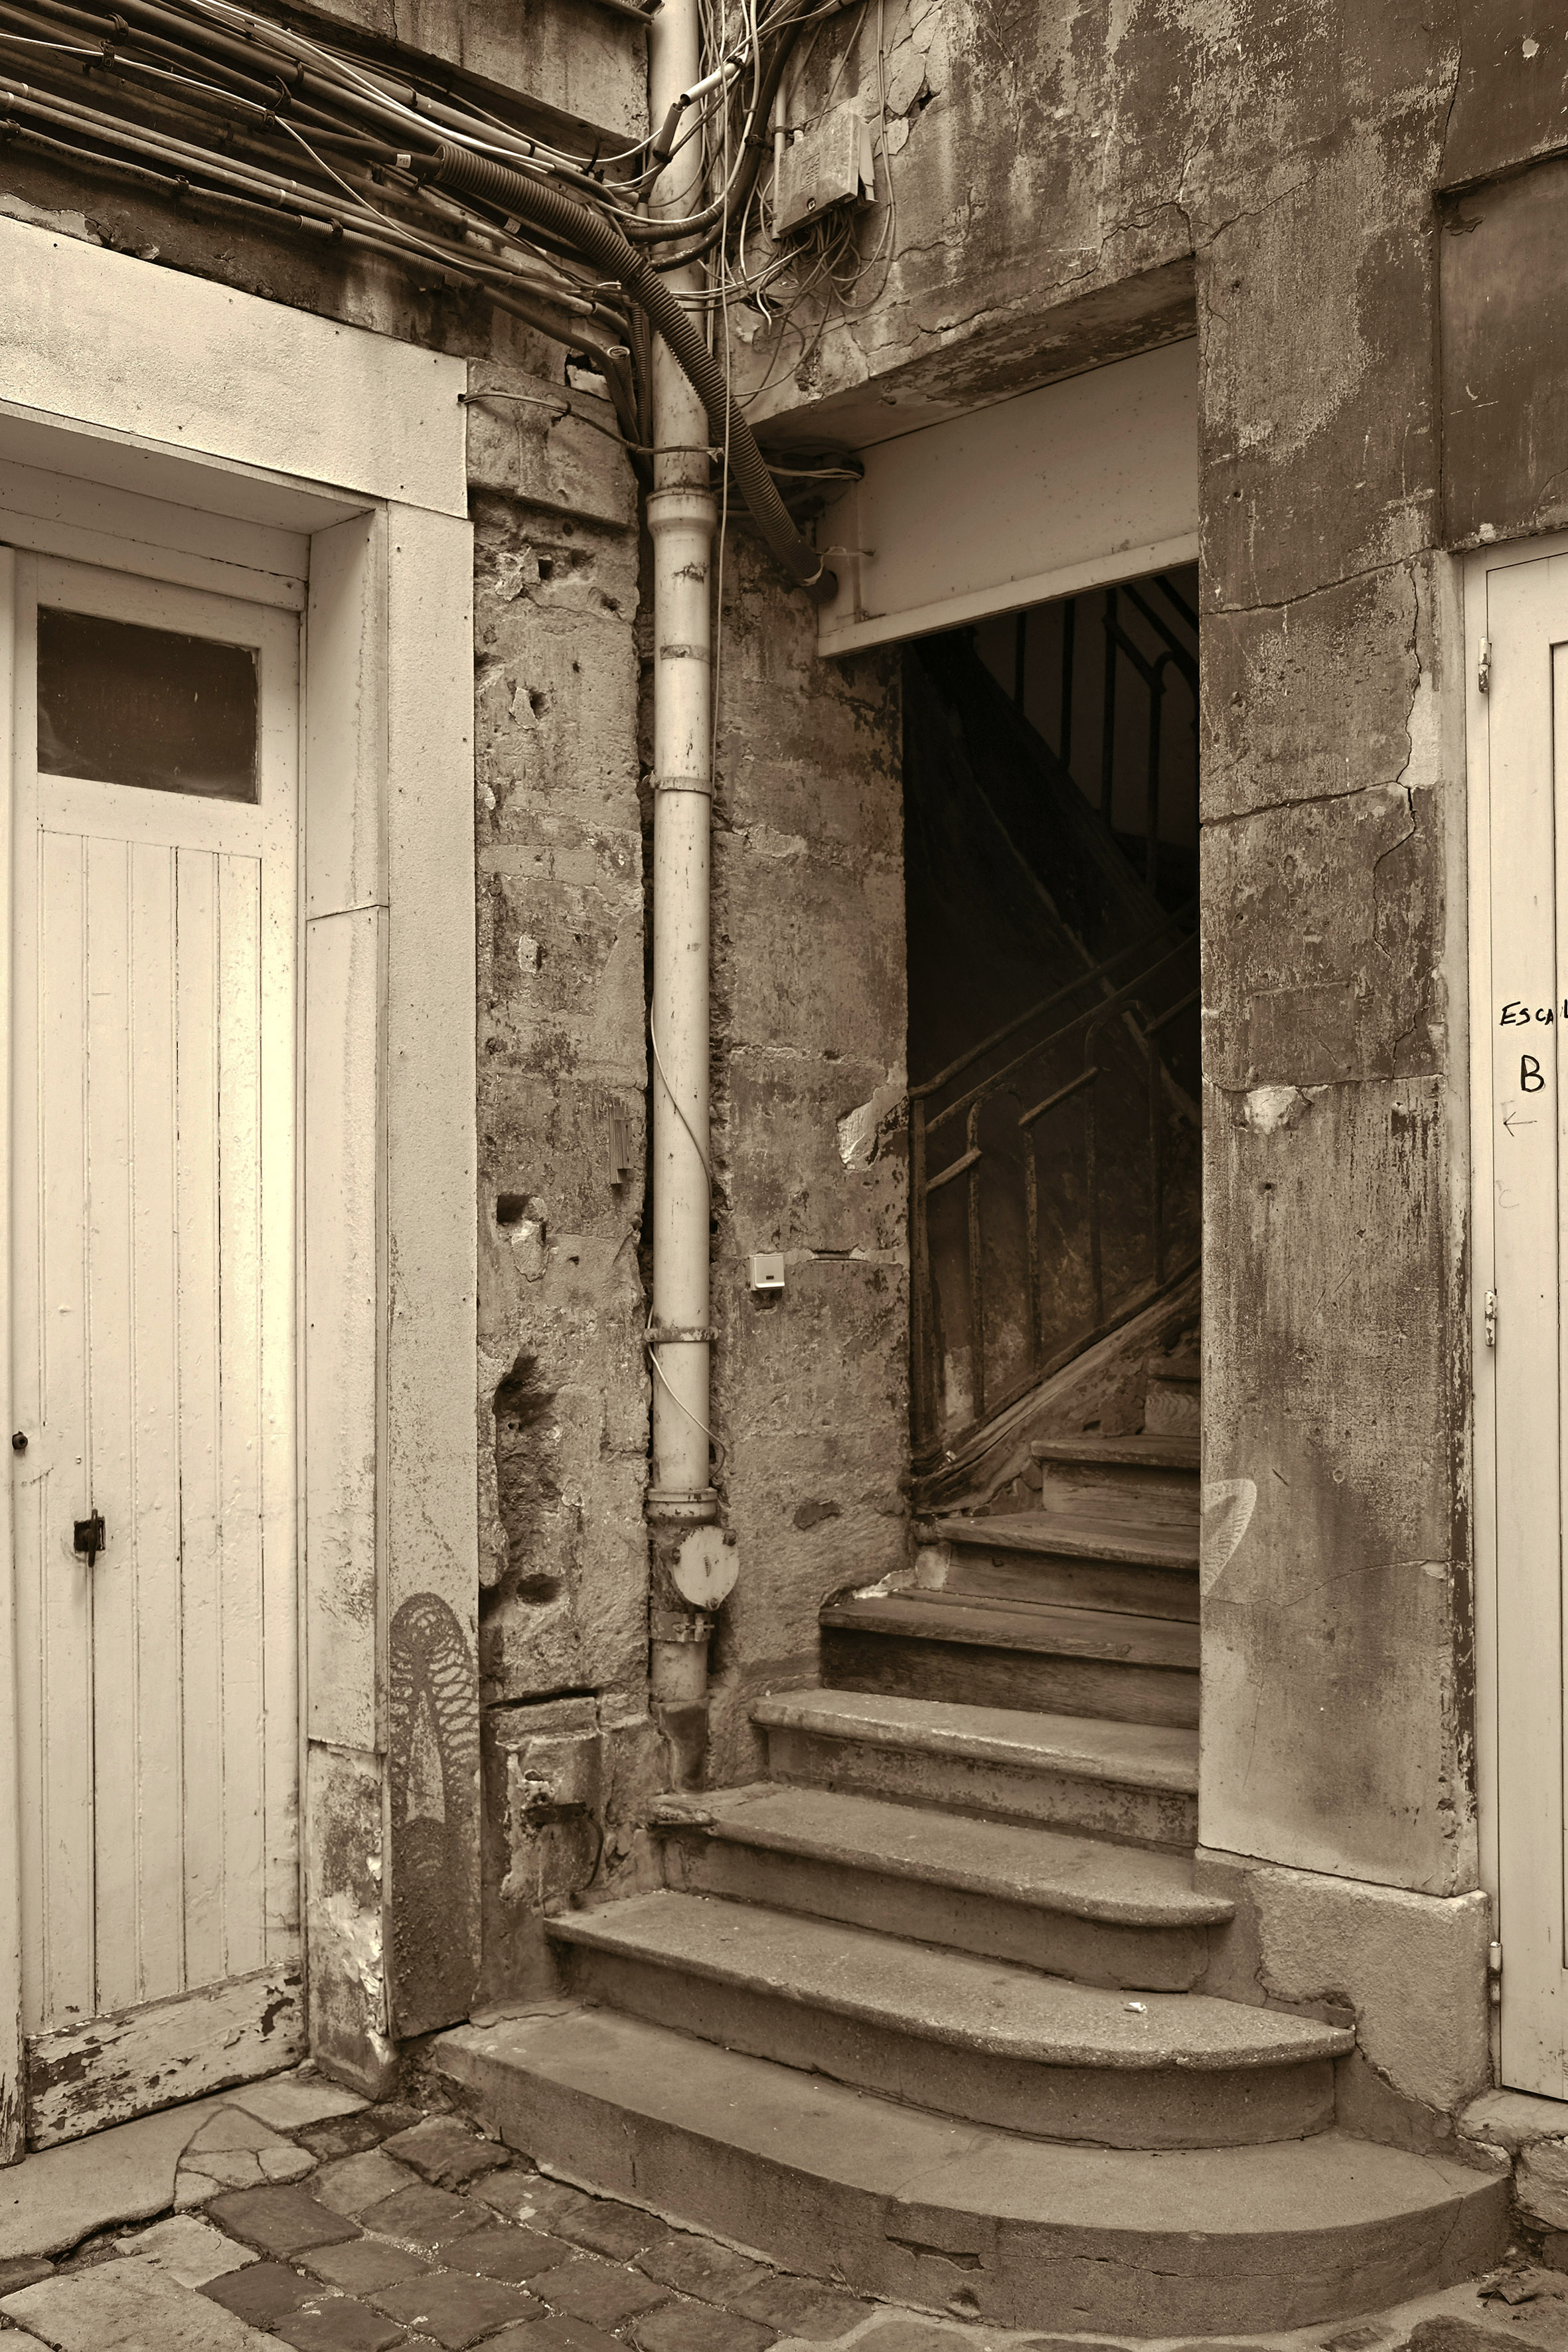 A greyscale image of a corner with stairwell